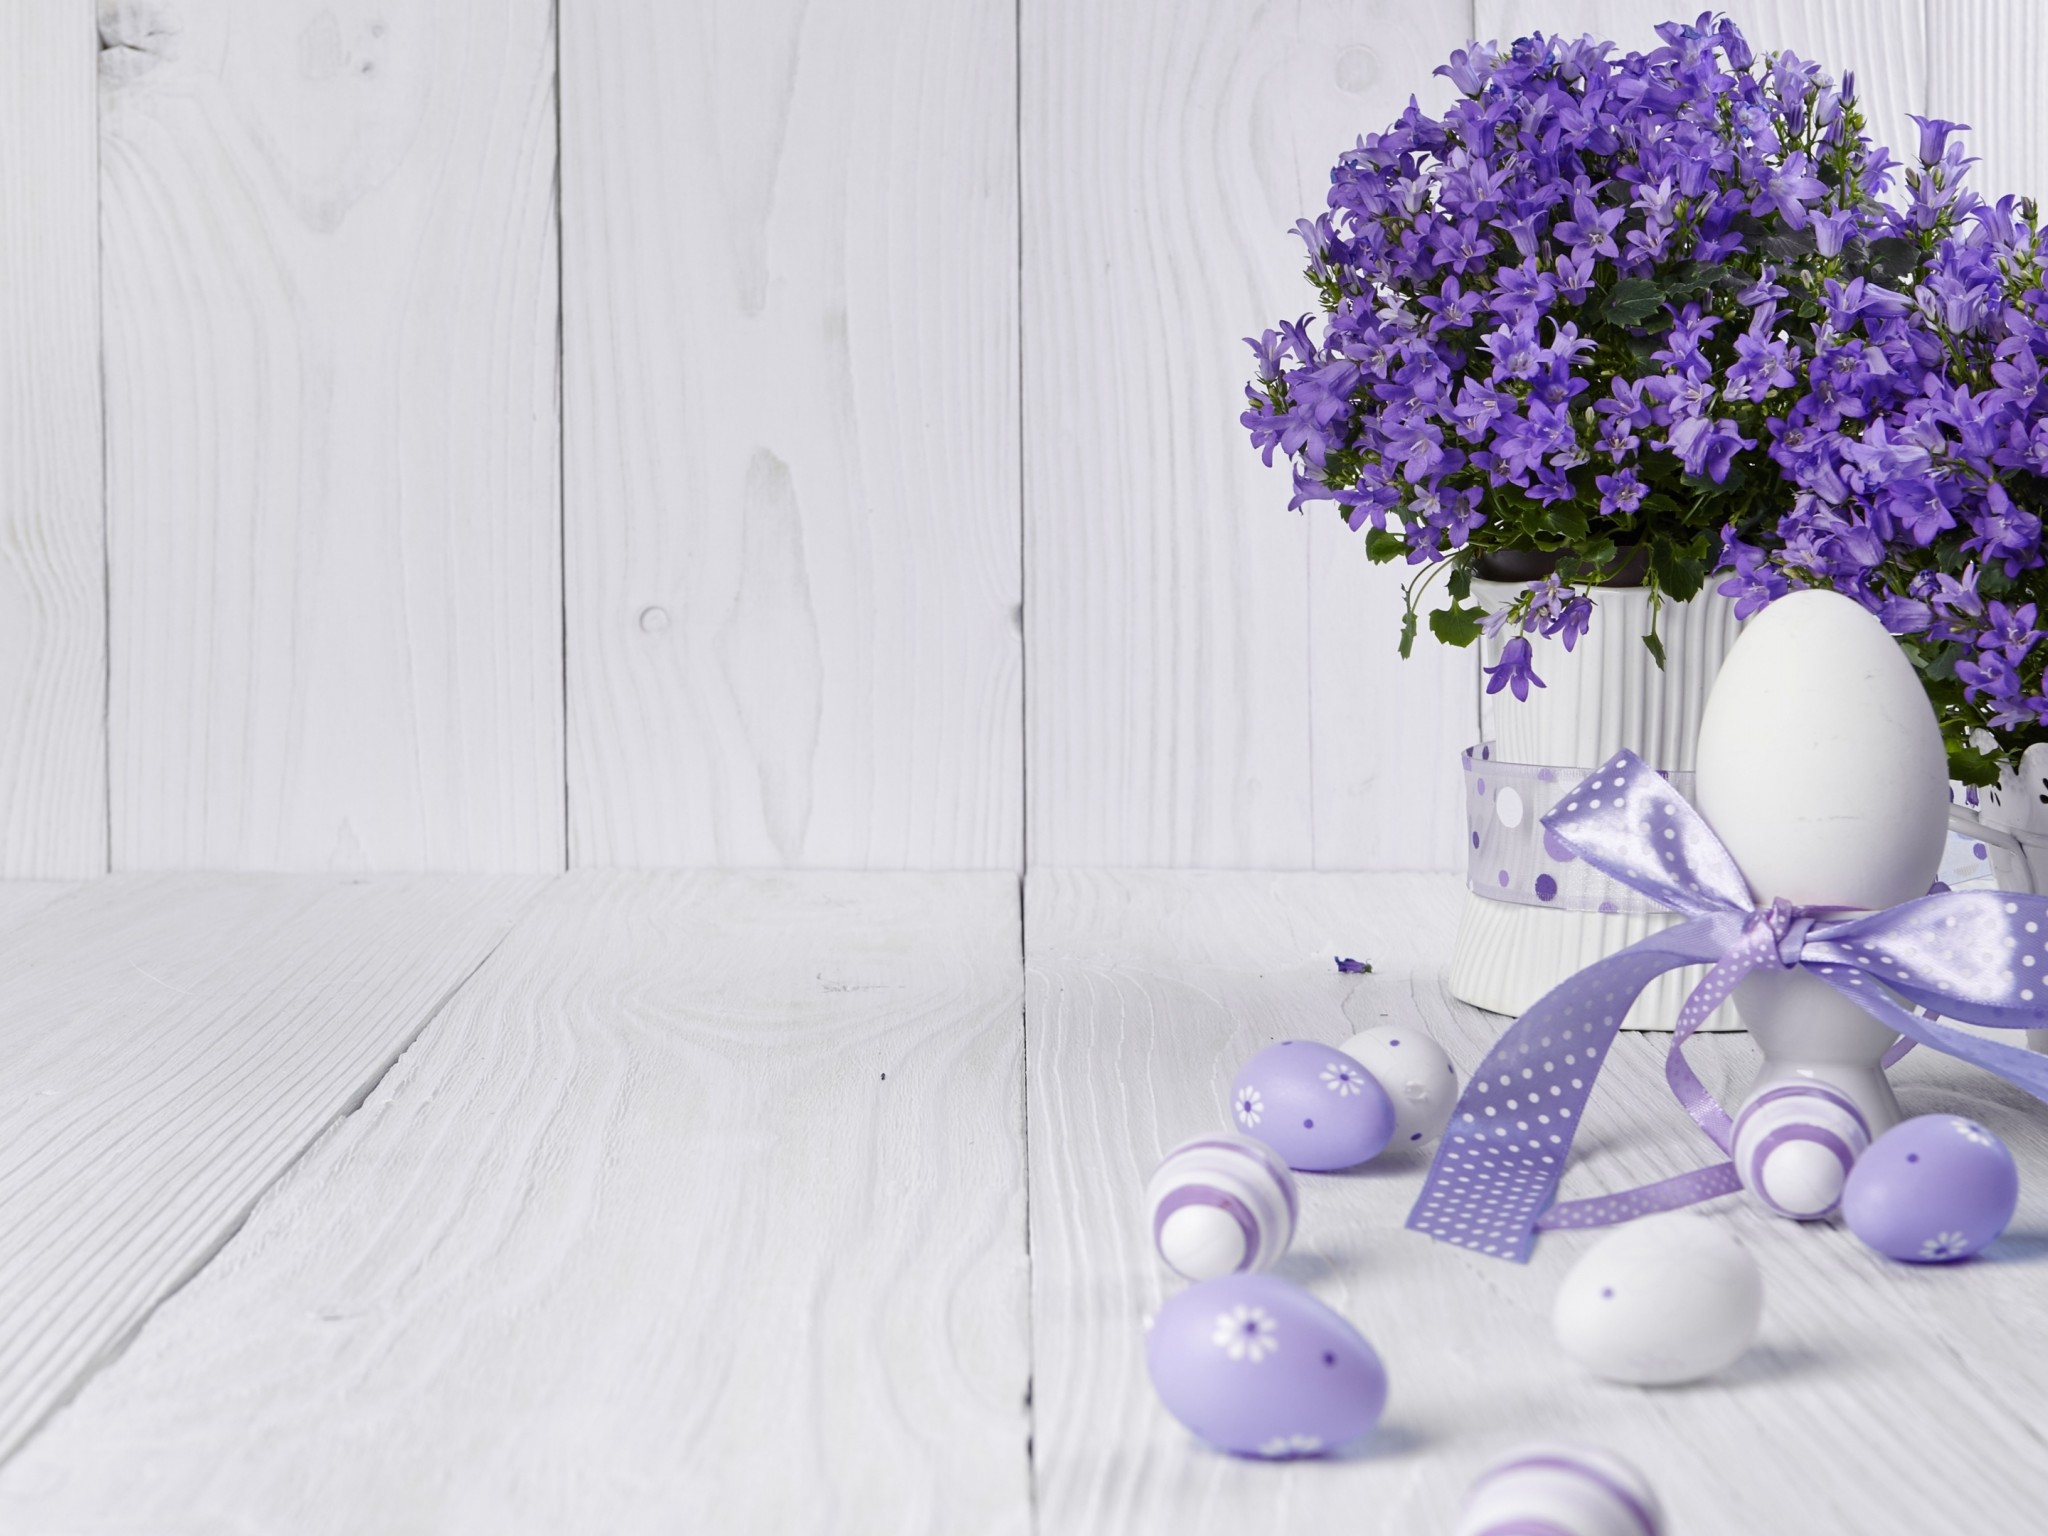 Easter Eggs With Lavender 4k Ultra HD Wallpaper